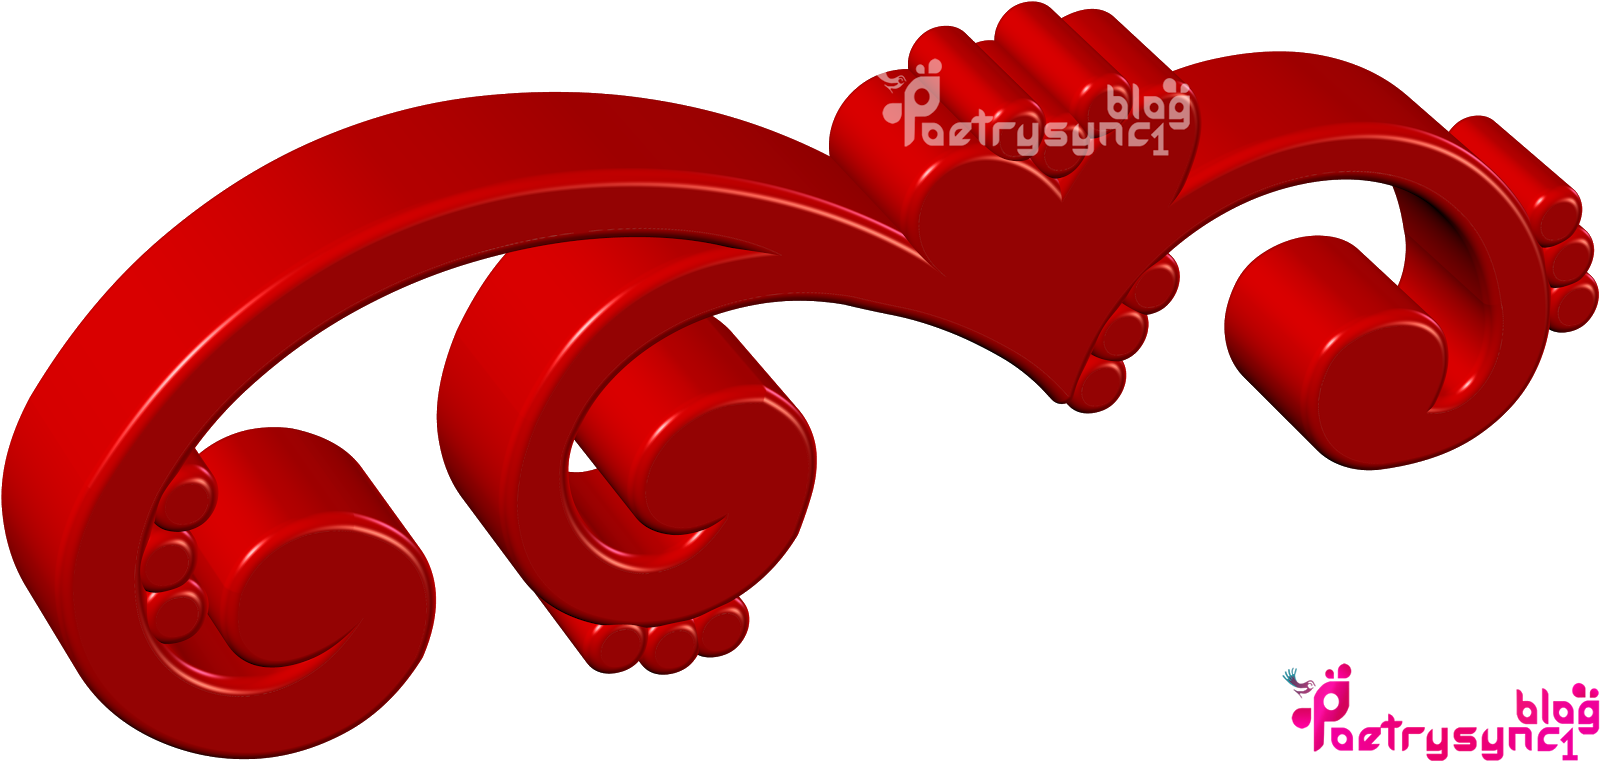 Love-3D-Vector-In-Red-Colour-By-Poetrysync1.blog